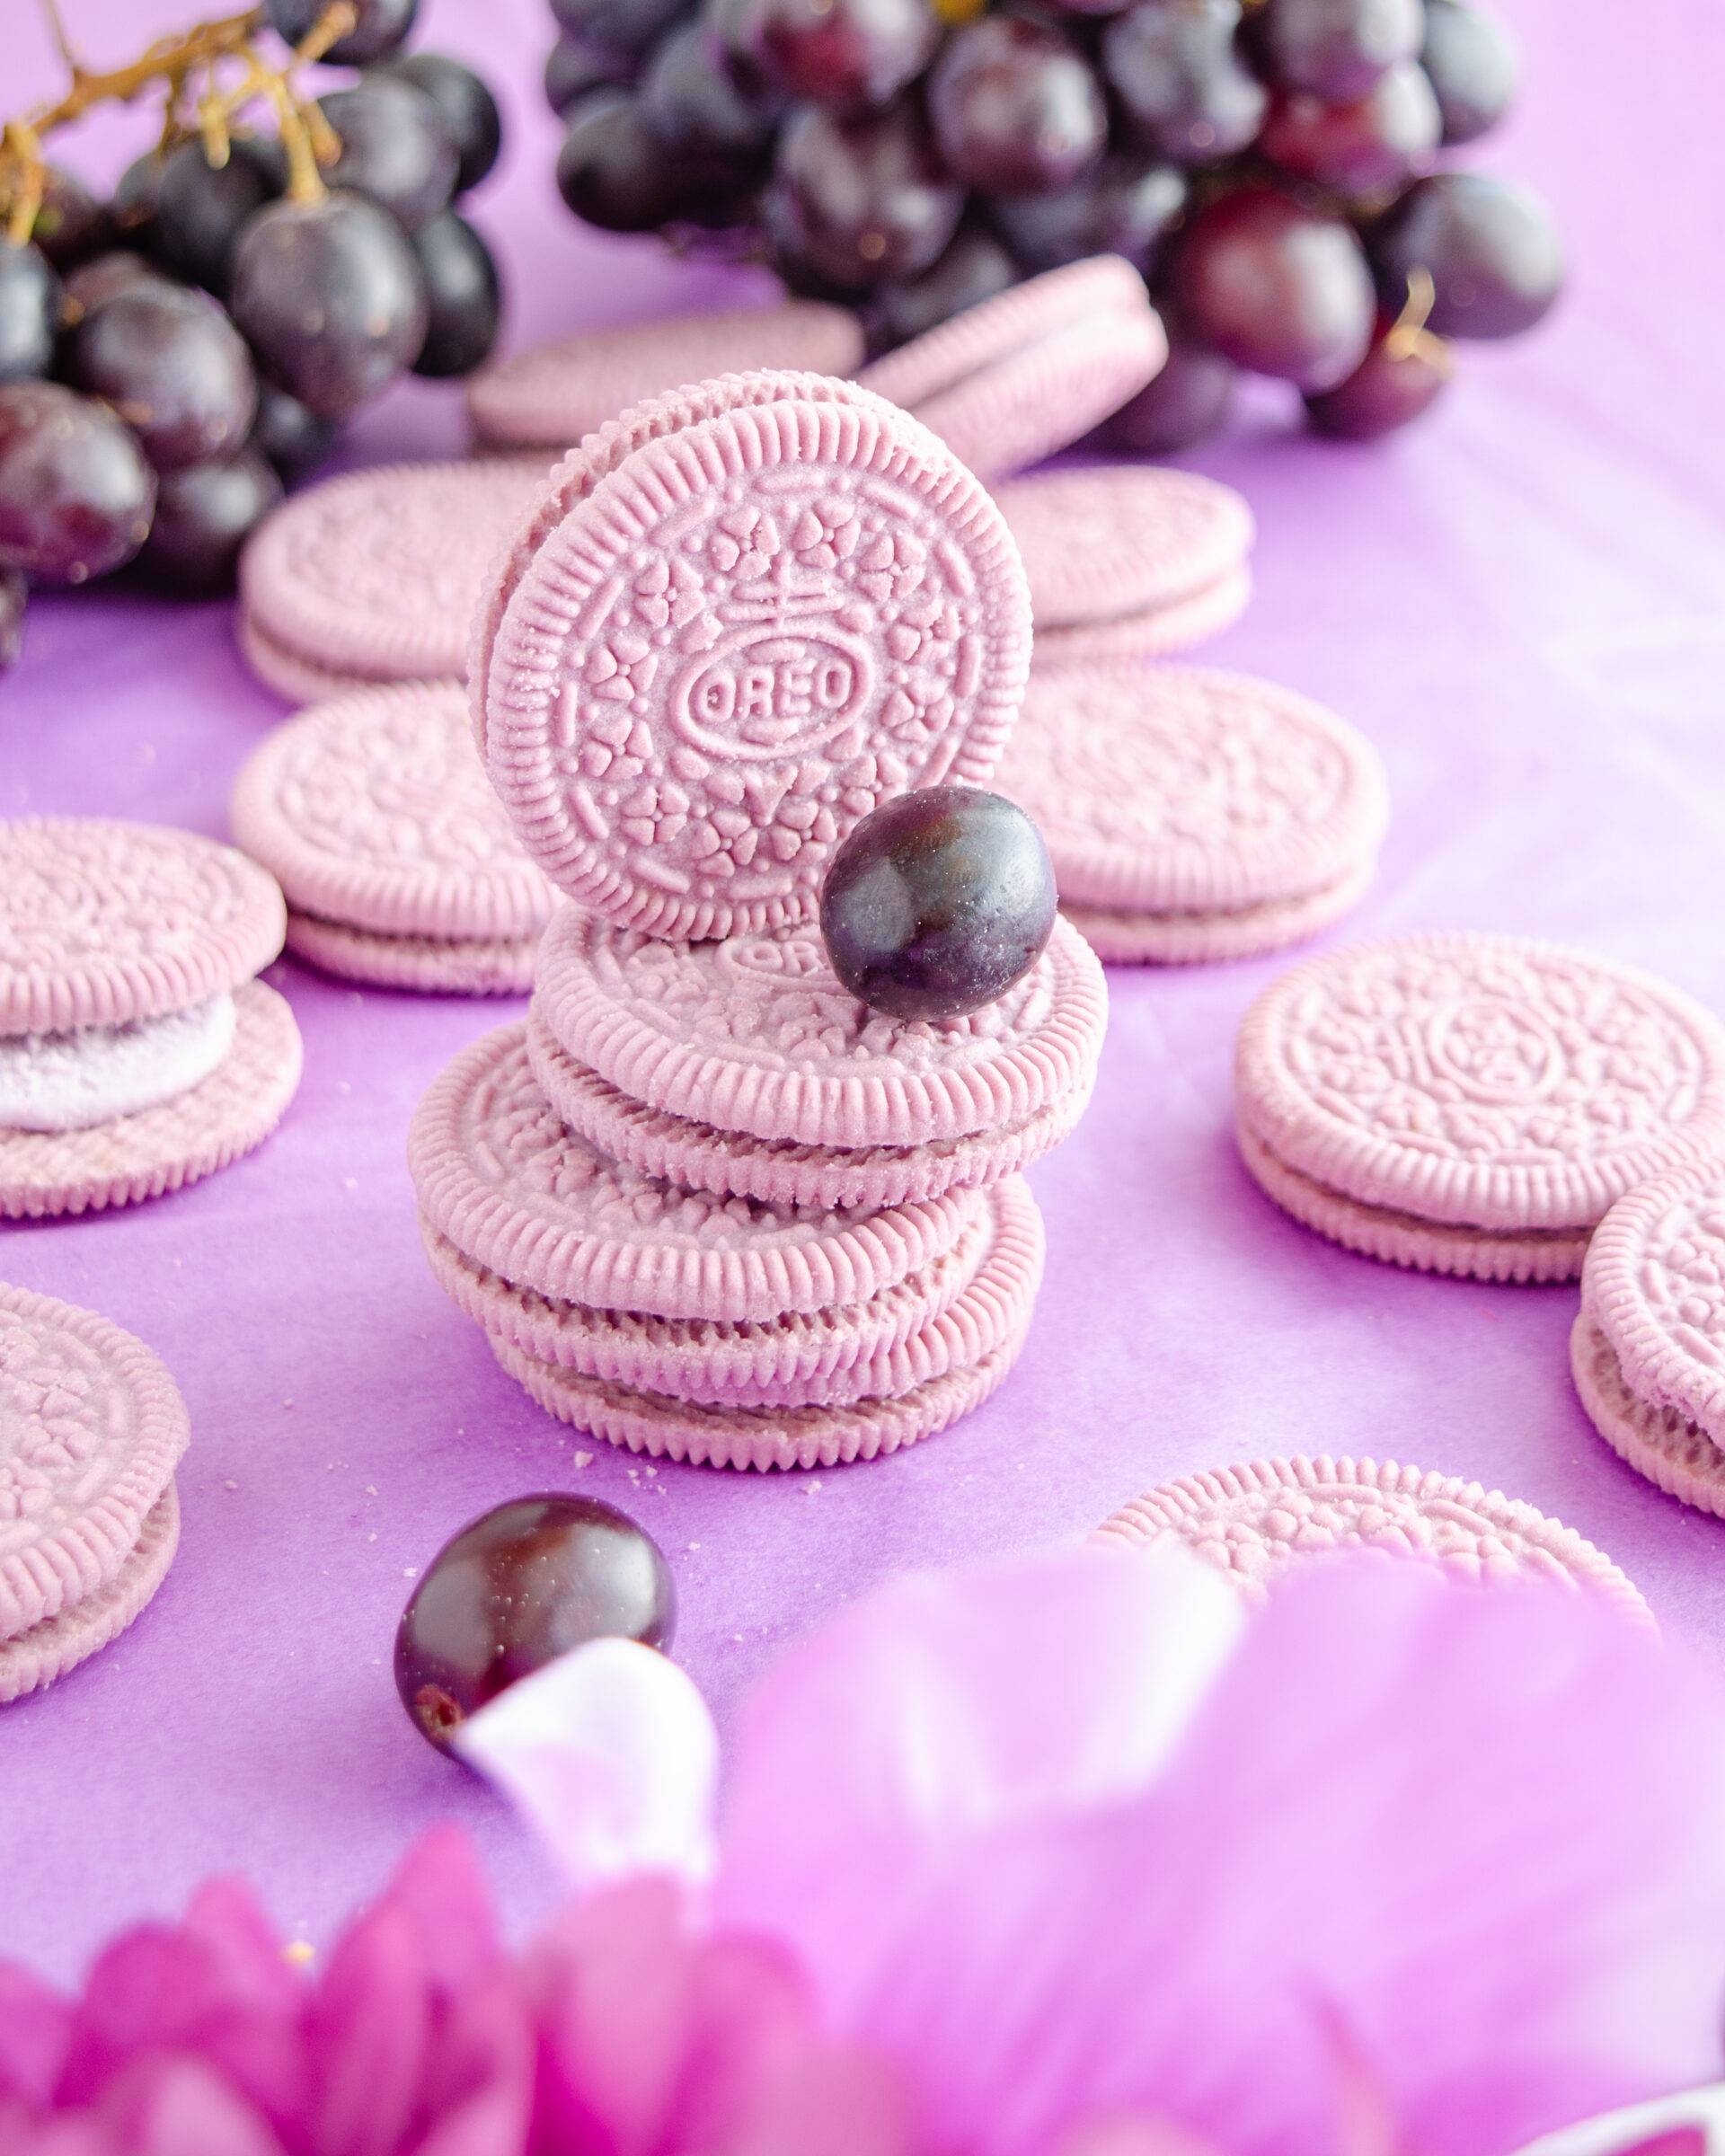 Grape oreos stacked with grapes and flowers